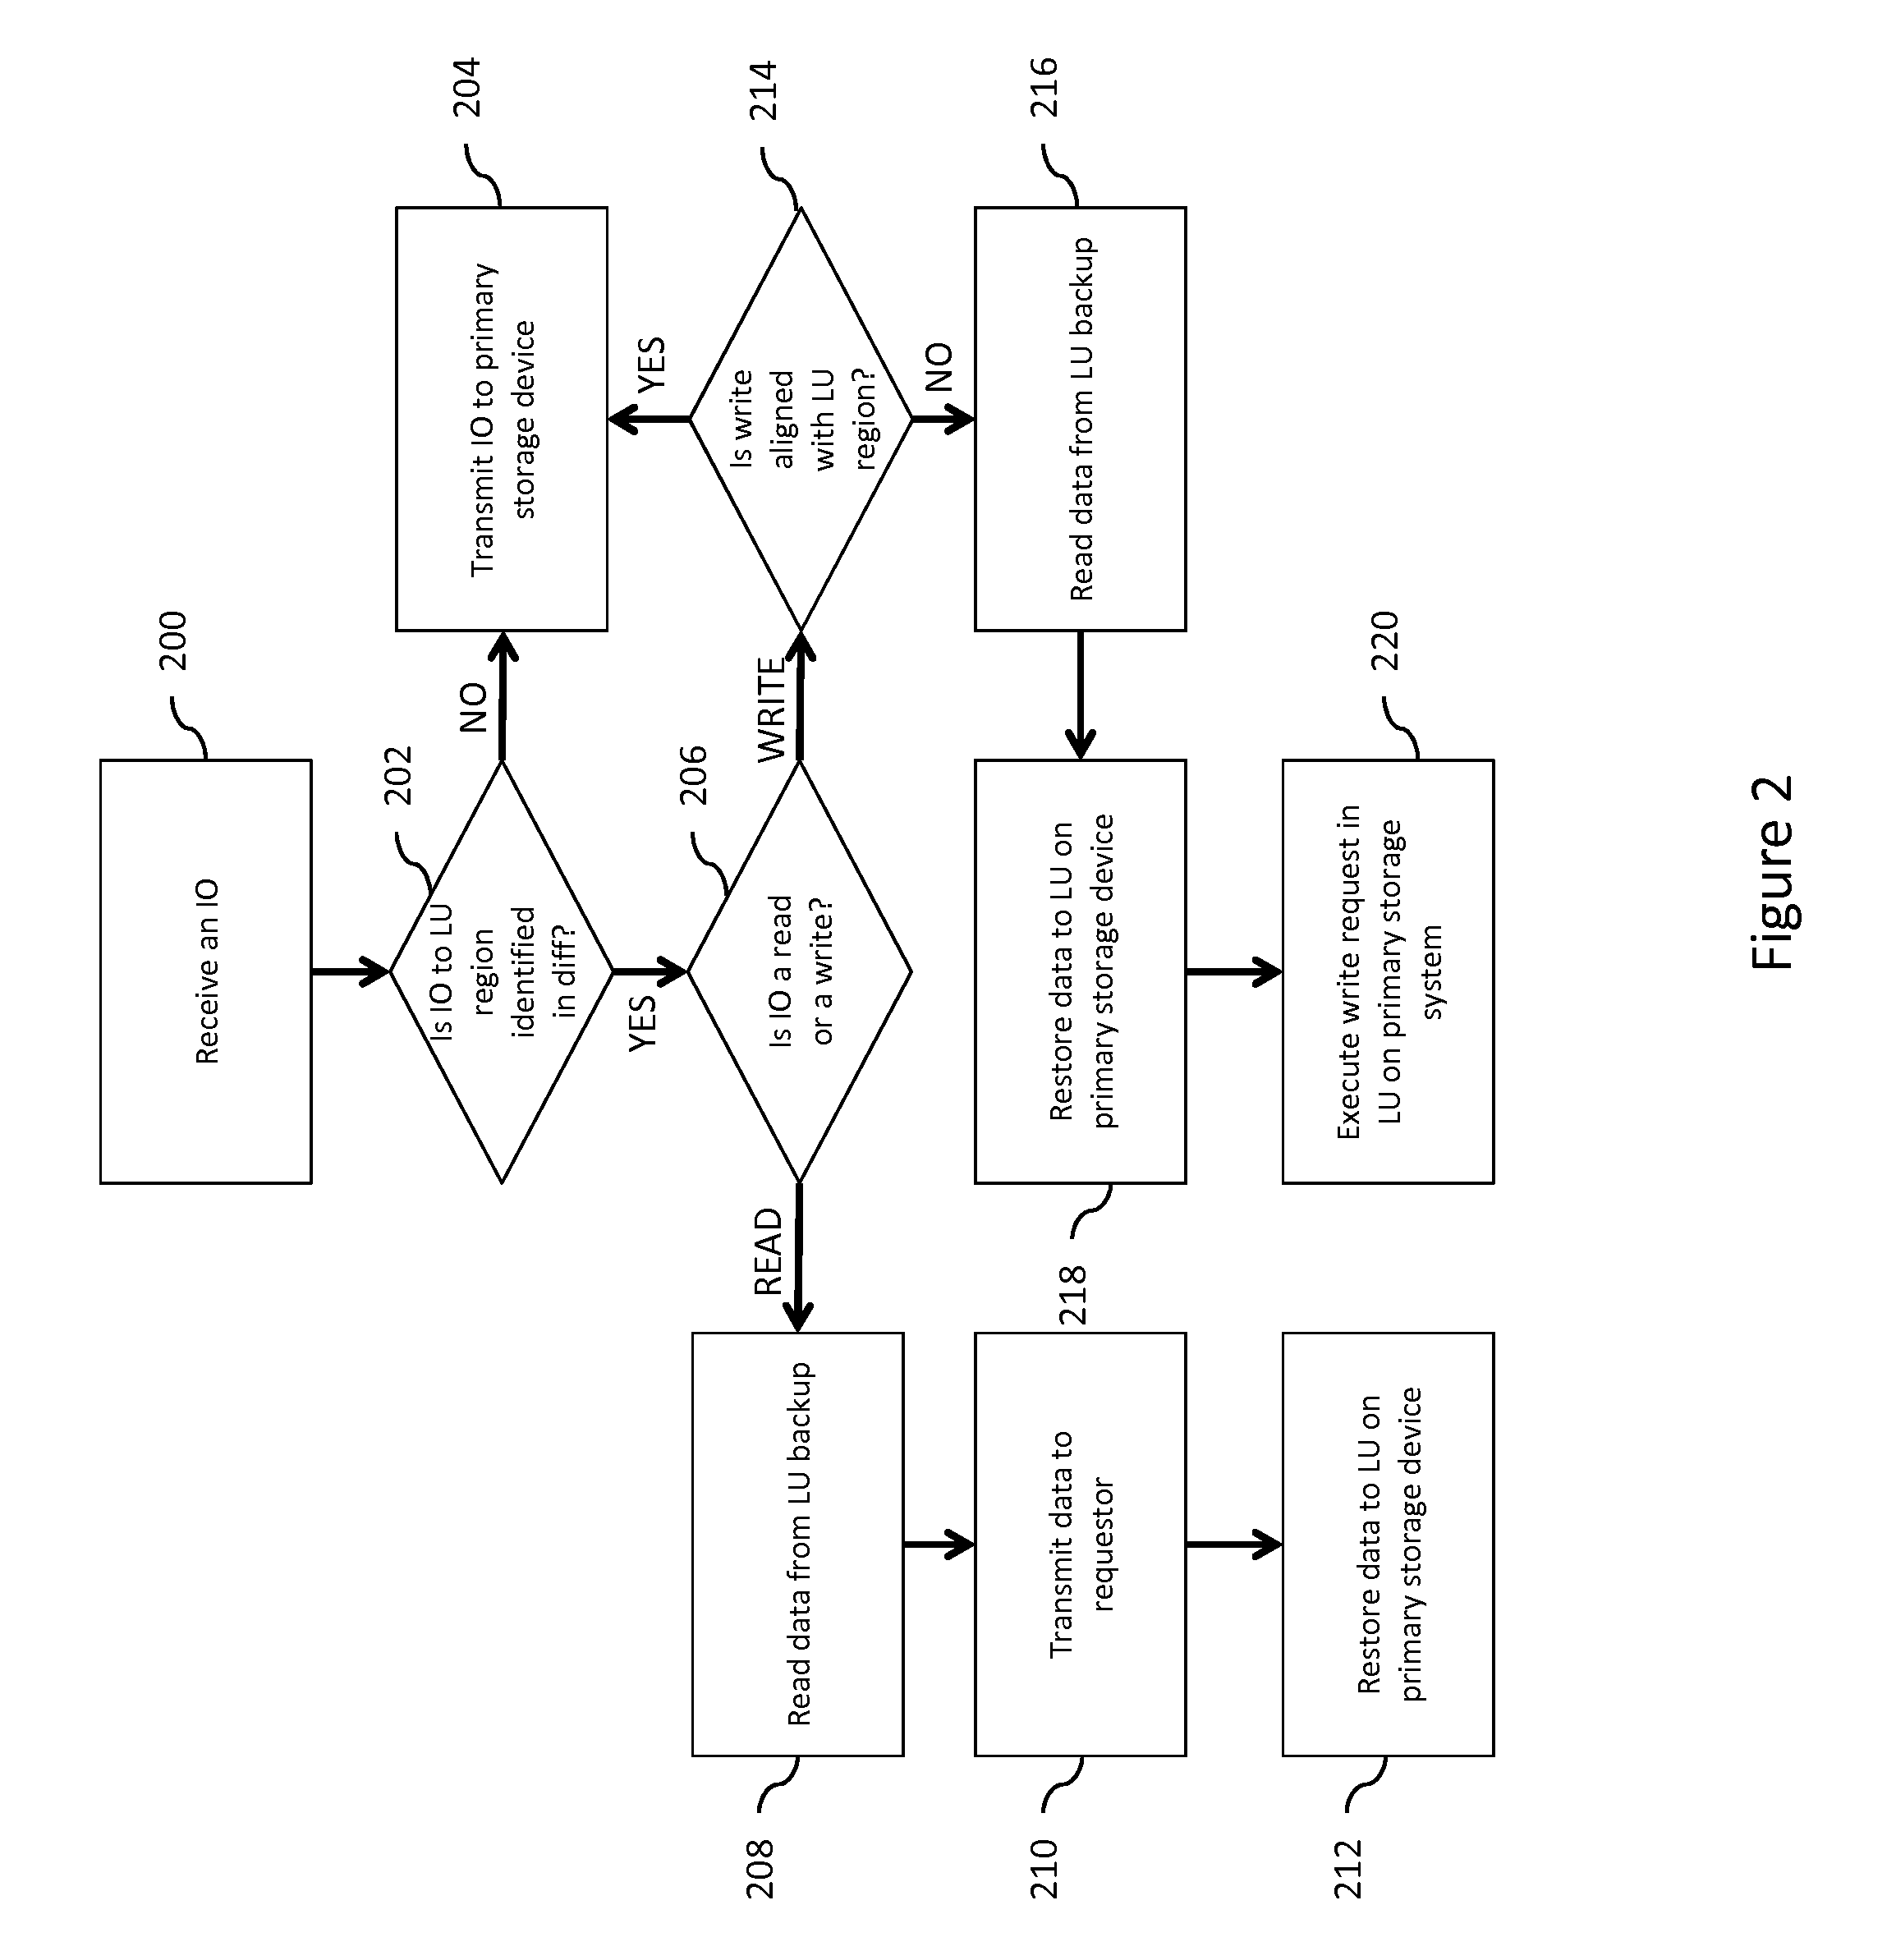 Concurrent data recovery and input/output processing